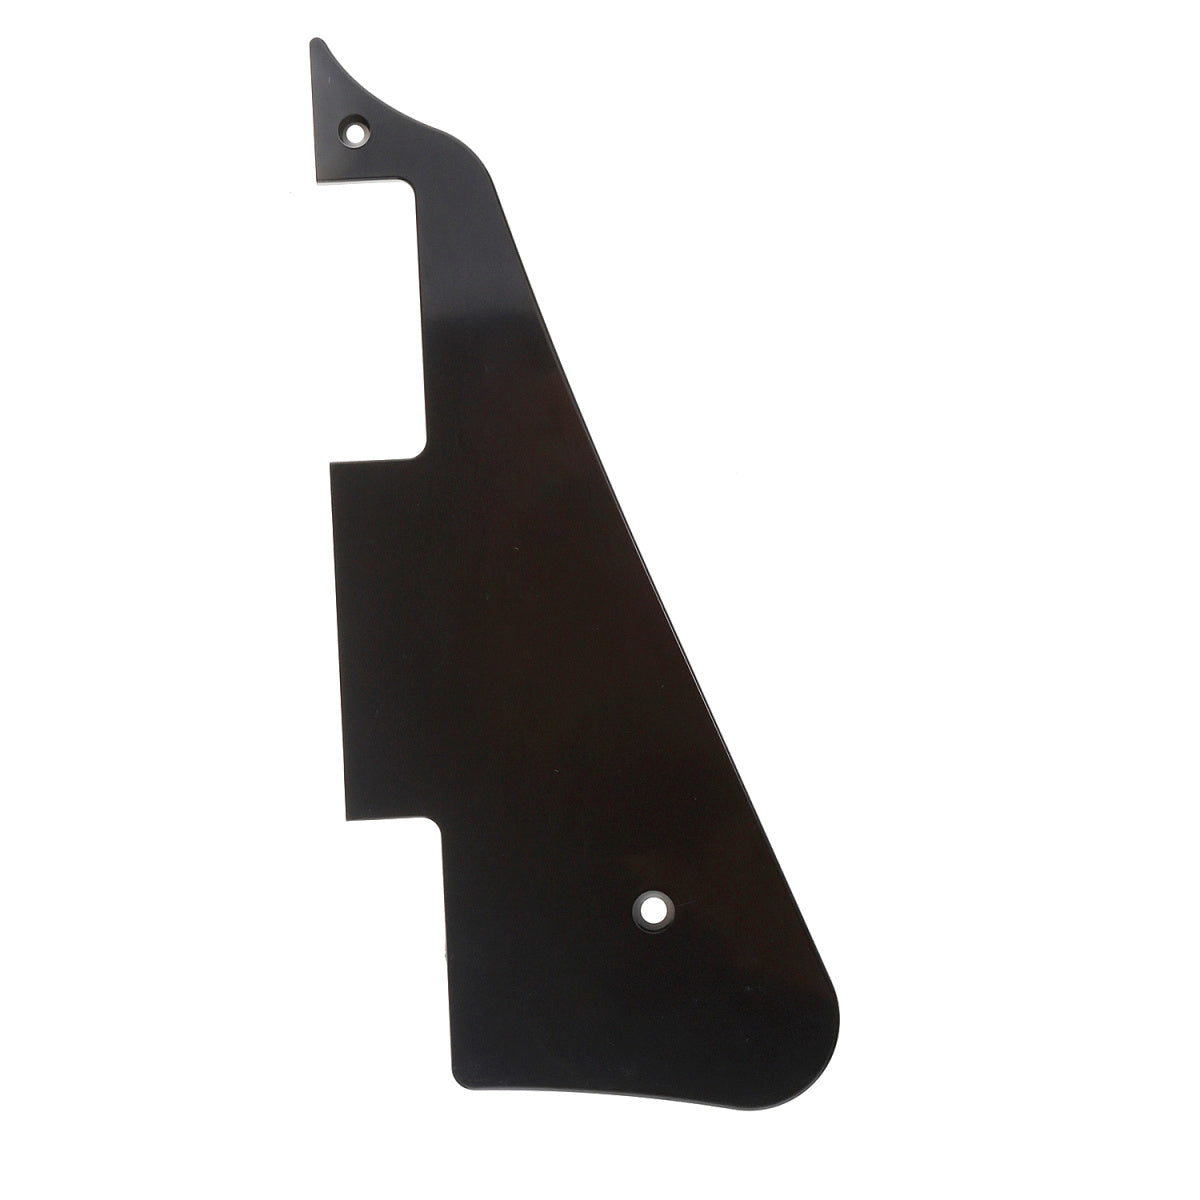 Musiclily Plastic Electric Guitar Pickguard for Epiphone Guitar,  3ply Black